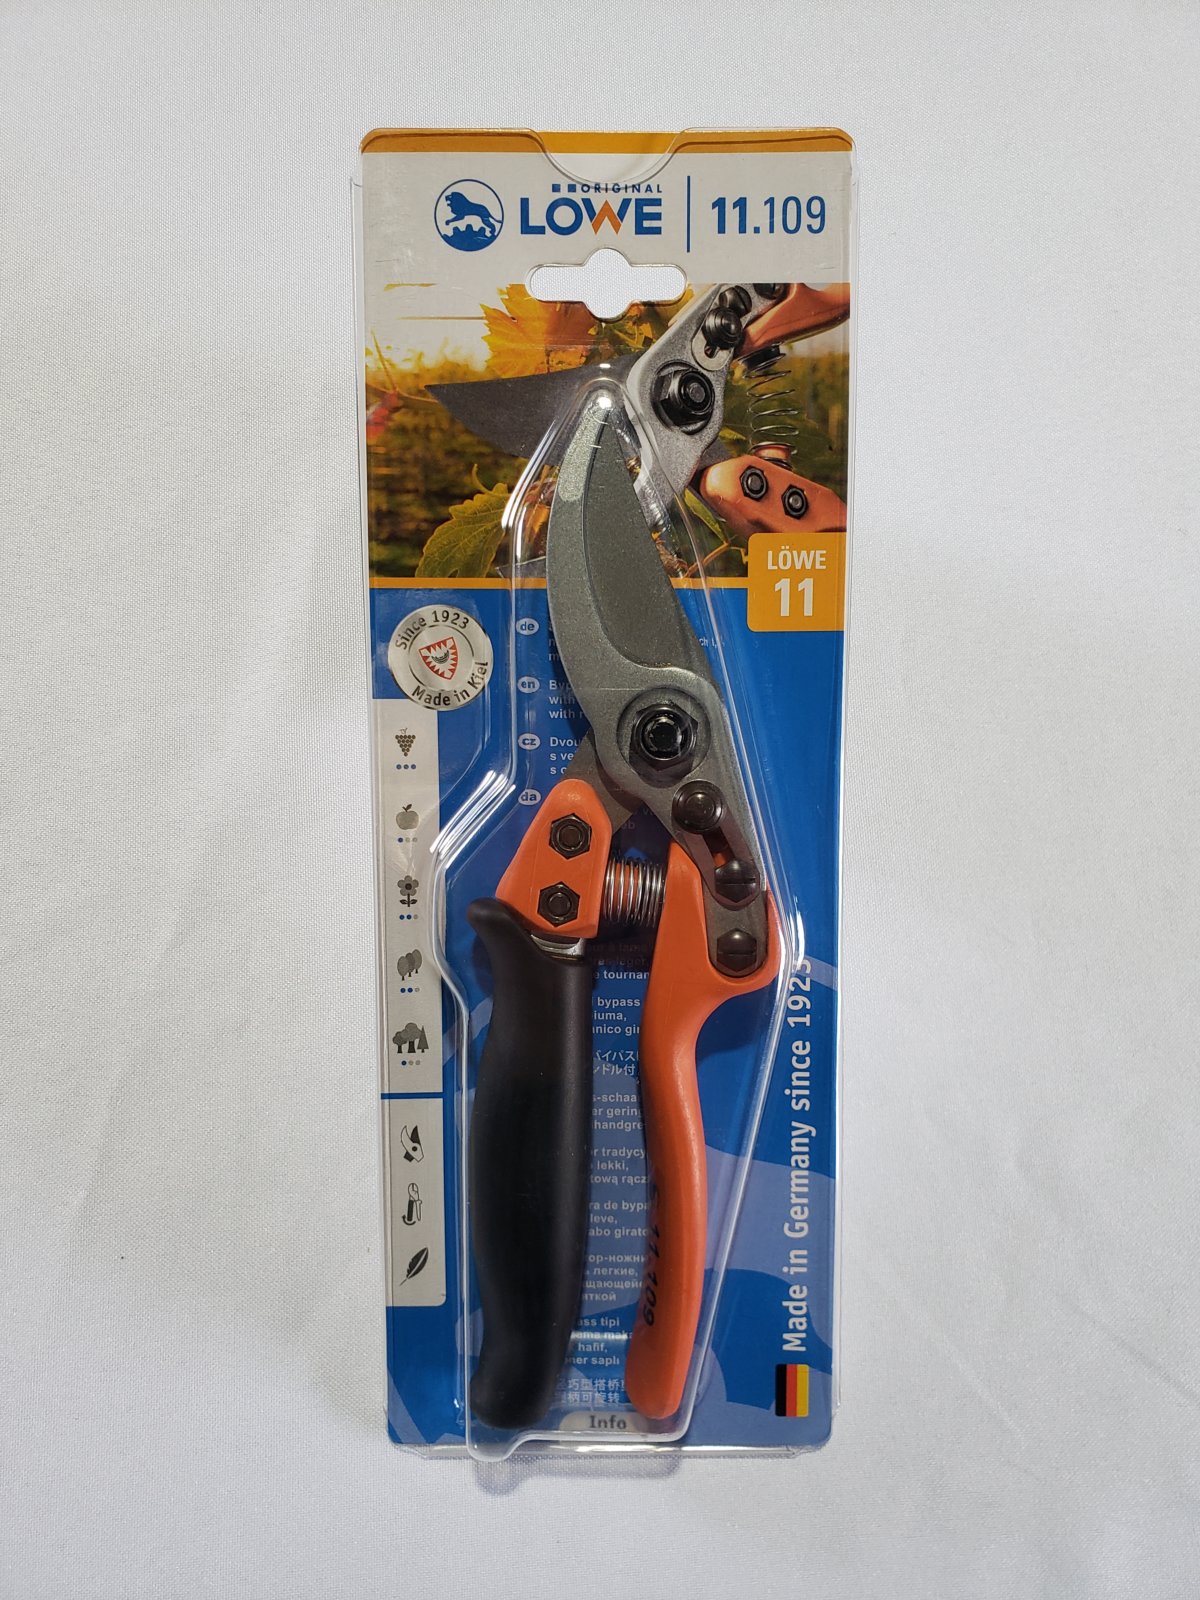 Lowe No 11.109 Pruning Shear, Rotating Handle (Comparable to Felco 7)